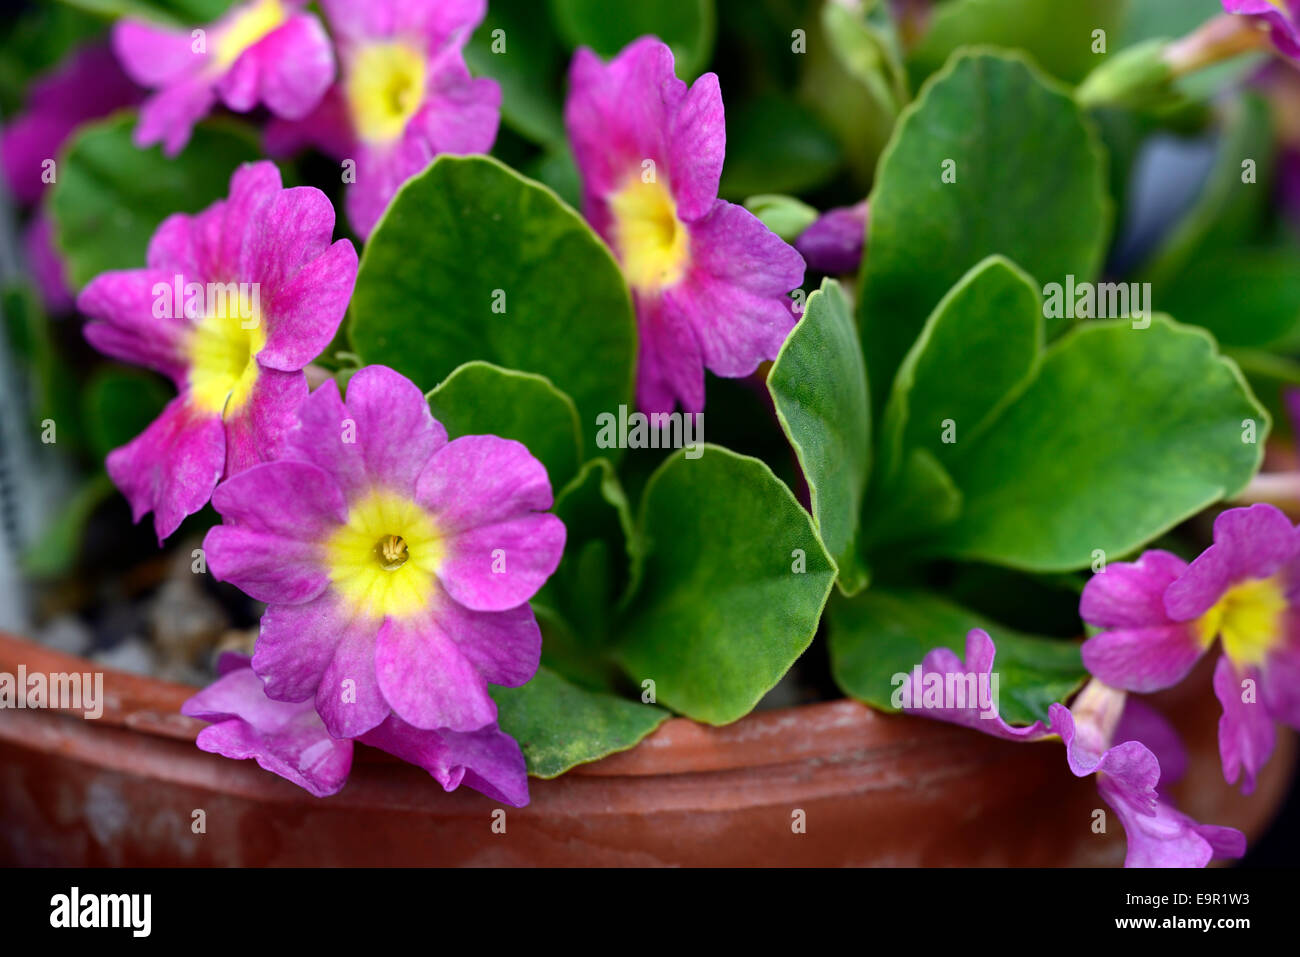 Allionii x Auricula old red dusty miller primula primulas flower flowers spring alpine plant RM Floral Stock Photo